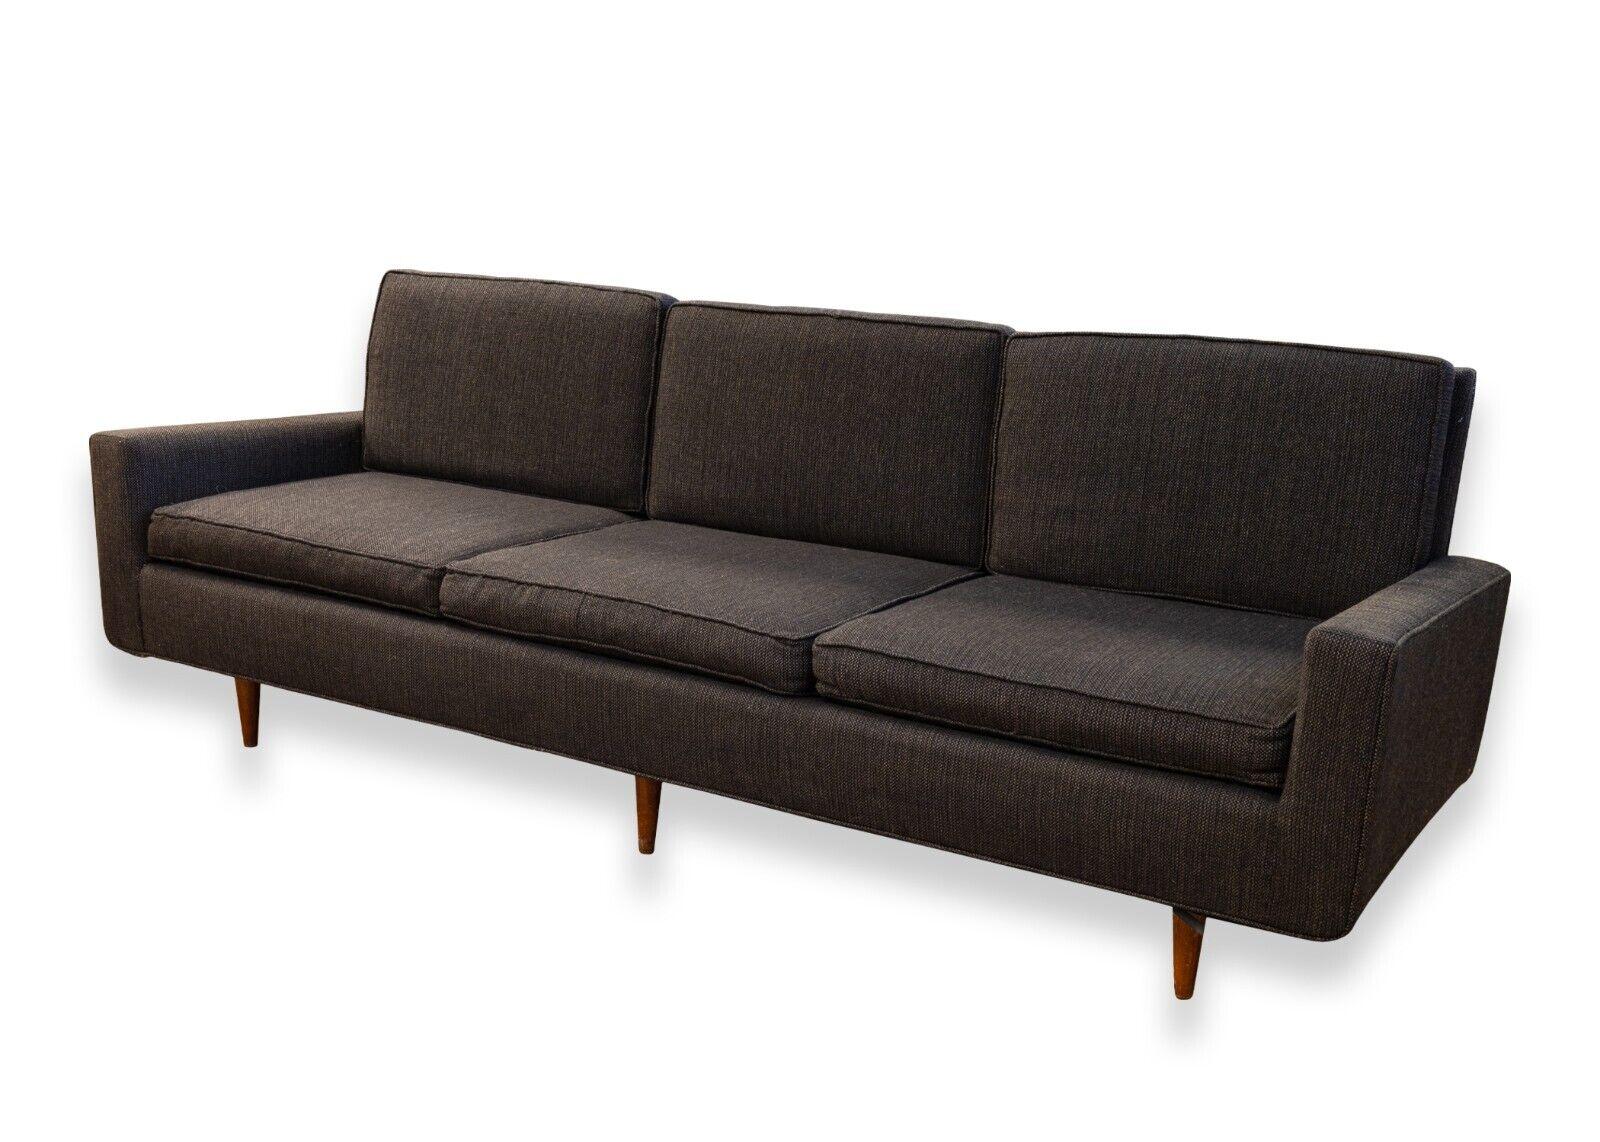 A mid century modern Knoll 1950's black sofa with wooden legs. A wonderful black sofa from Knoll featuring a classic, timeless design. This piece features a black upholstery from head to toe, six beautiful wooden legs, and removable cushions. This